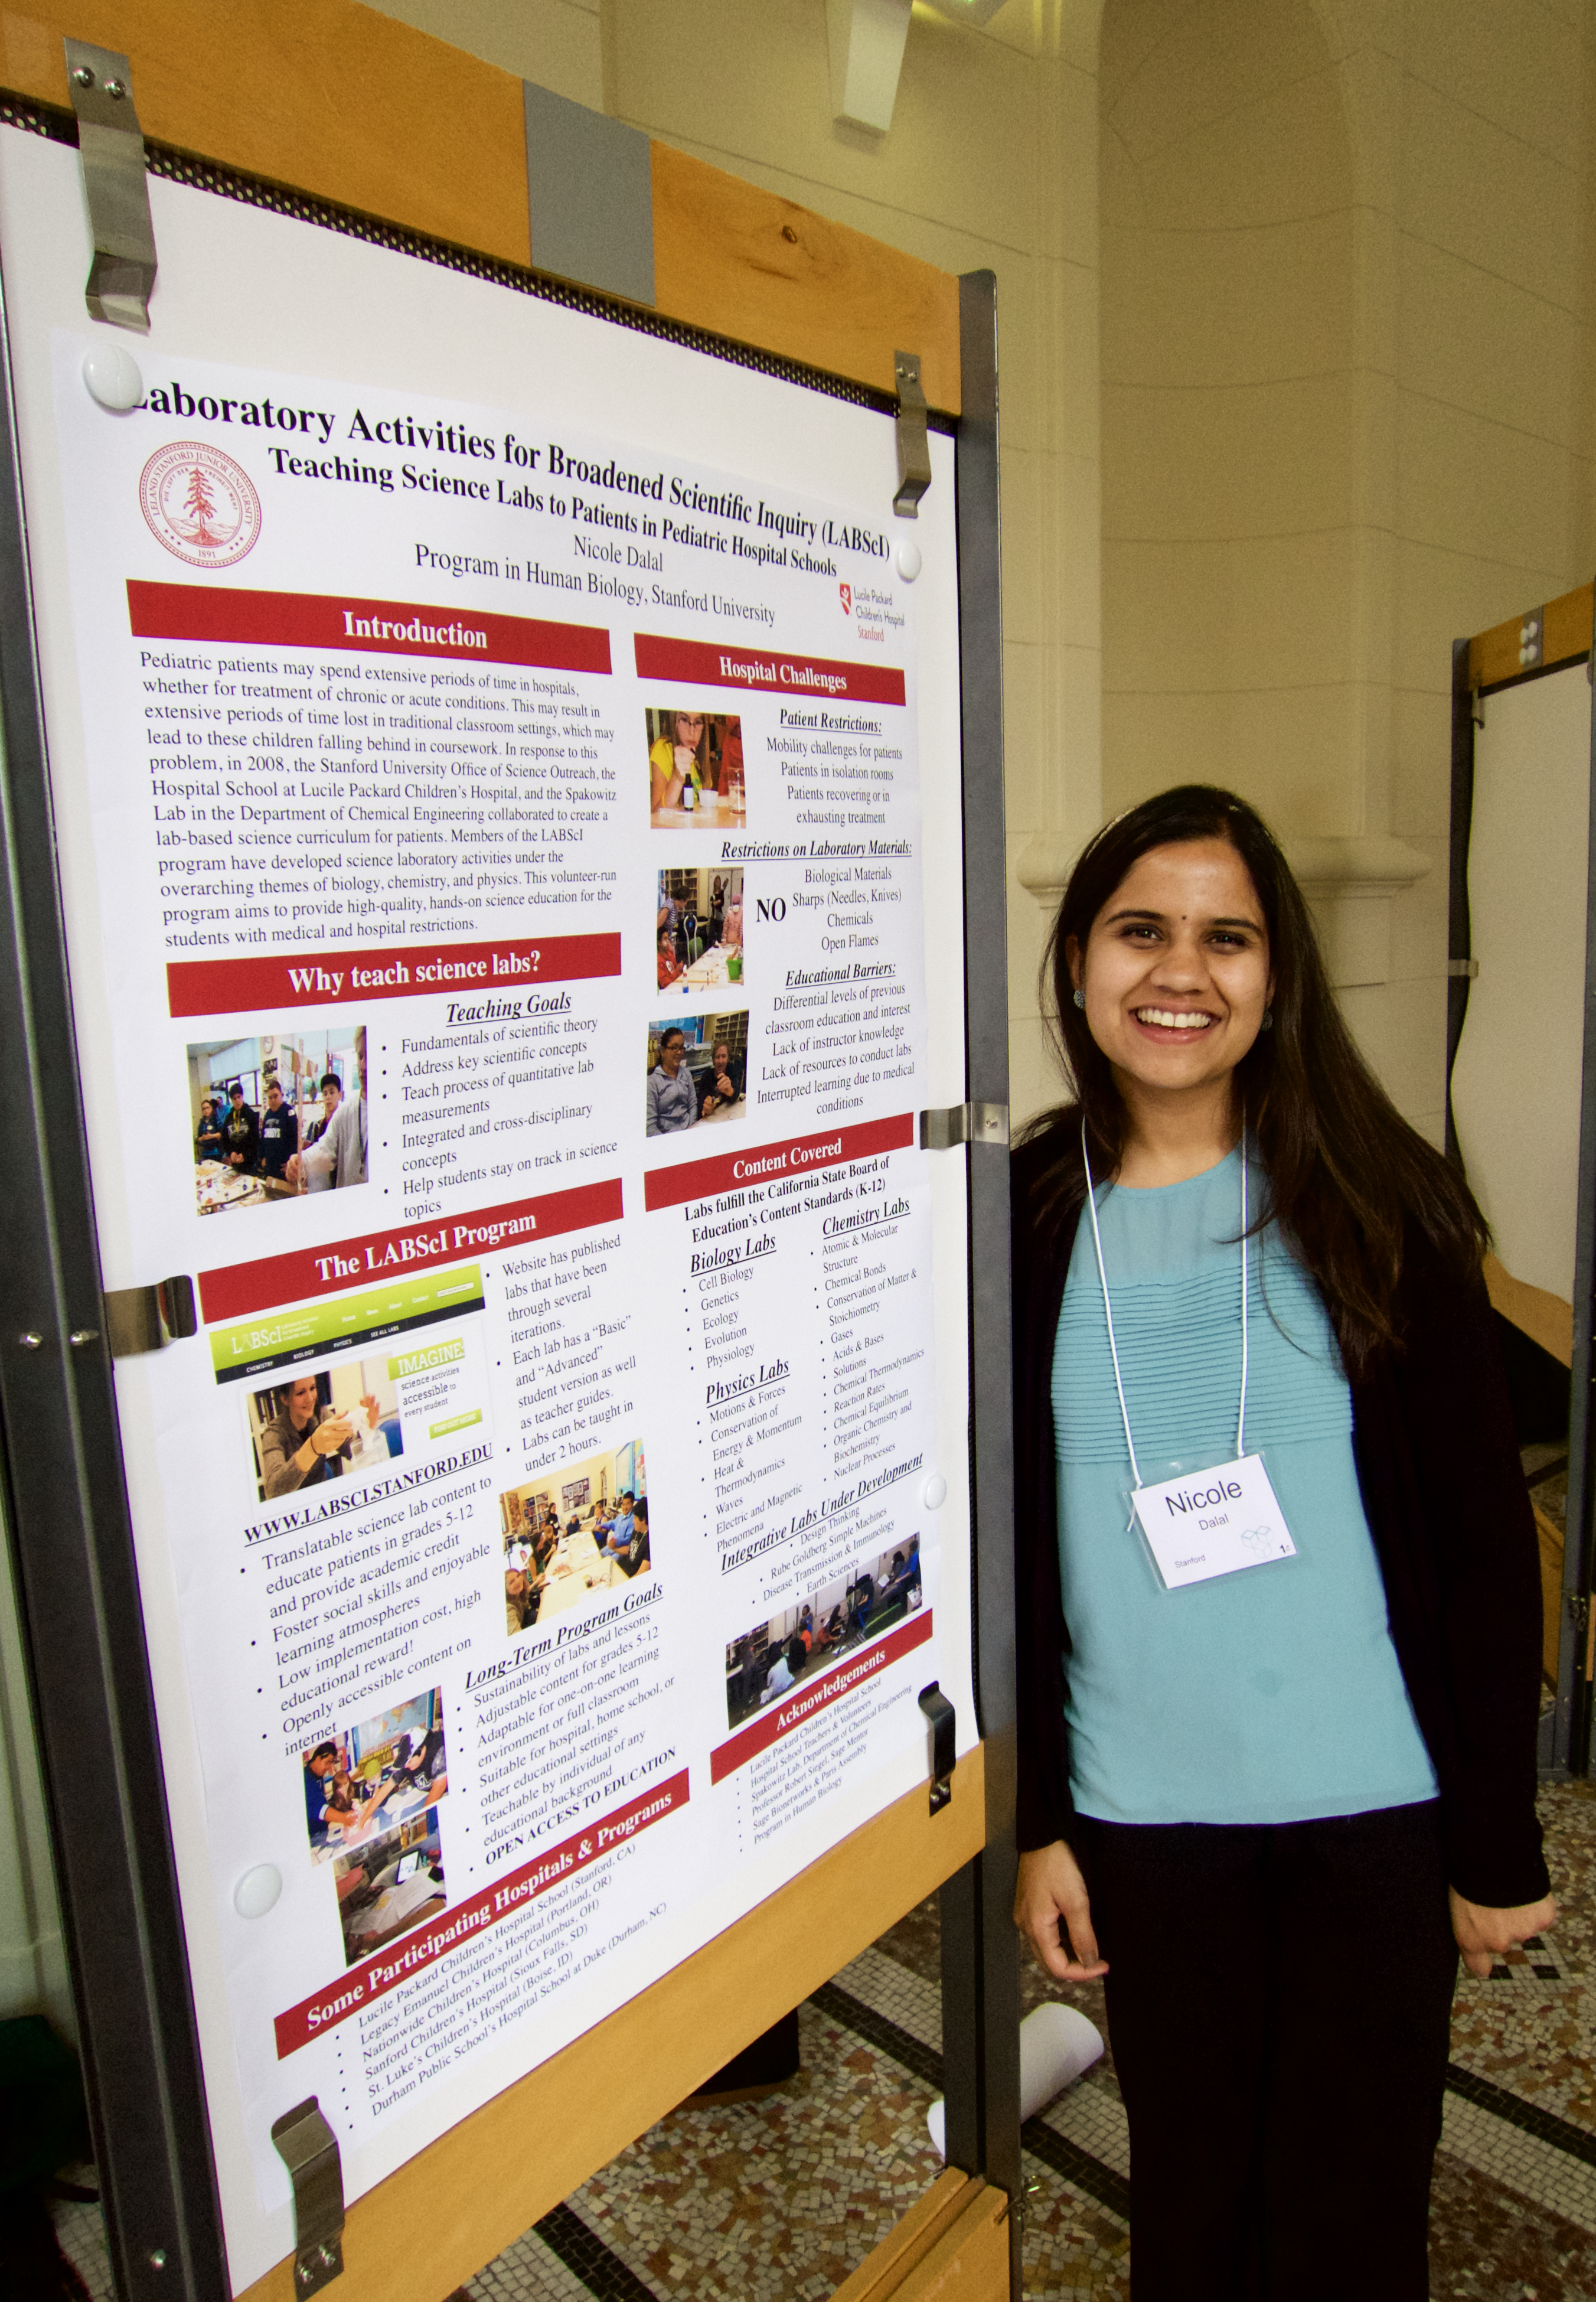 Sage Scholar Nicole Dalal, from Stanford University, is shown with her poster at the Paris Sage Assembly, April 16, 2015.